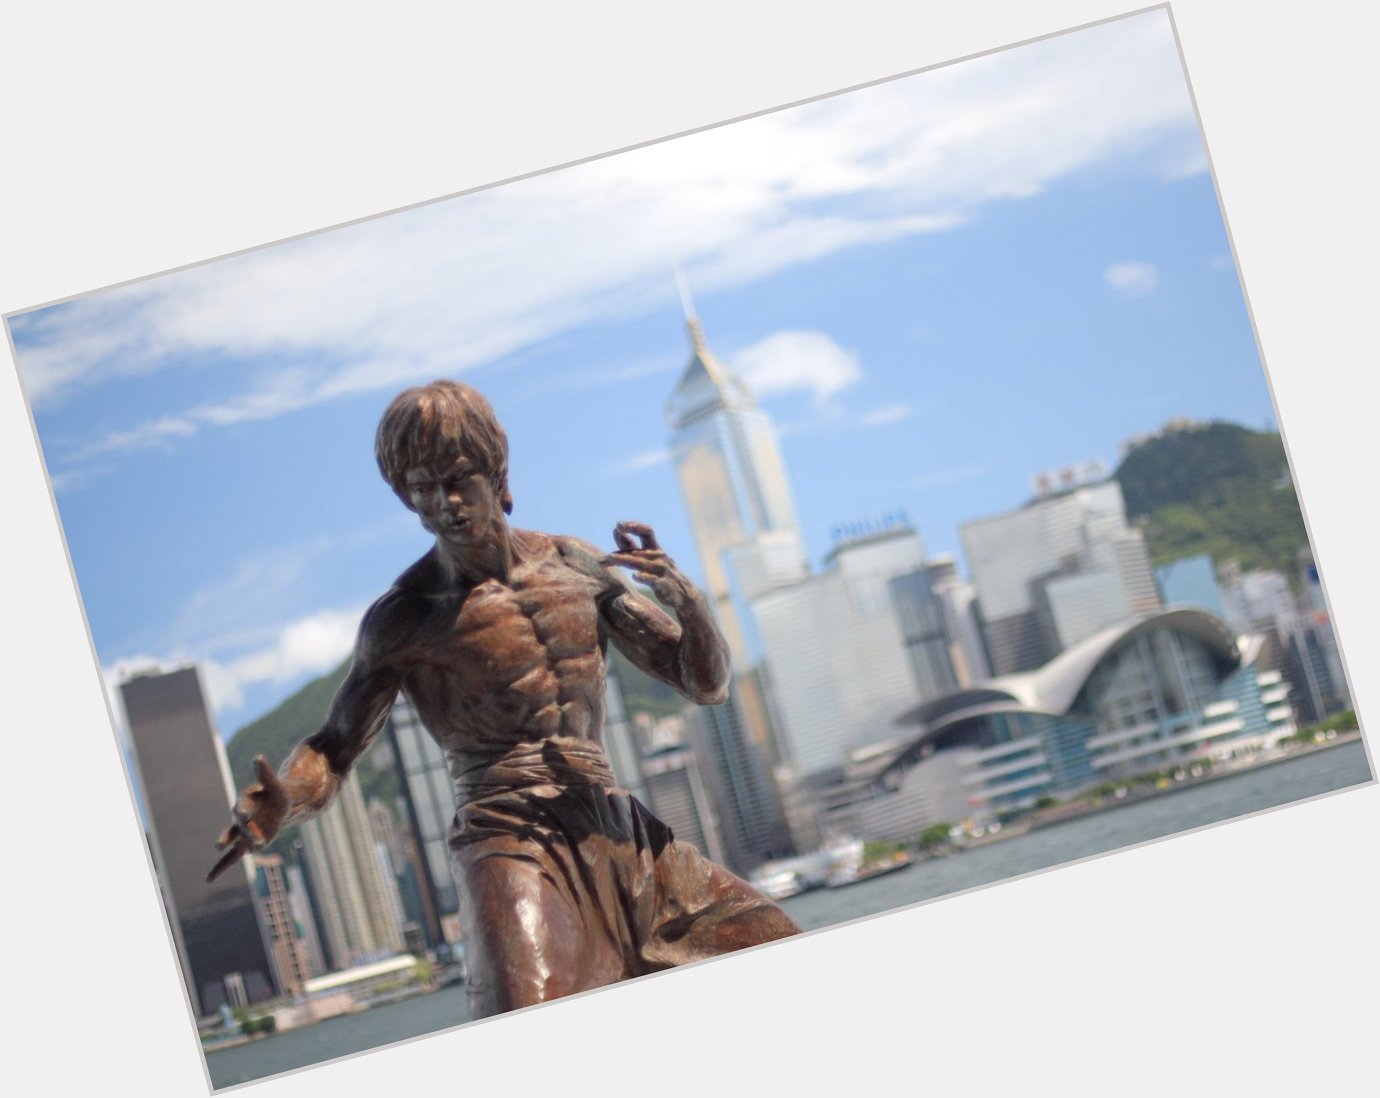 ICYMI - Happy 75th birthday Bruce Lee! Here are 75 obscure facts about the Hong Kong icon  